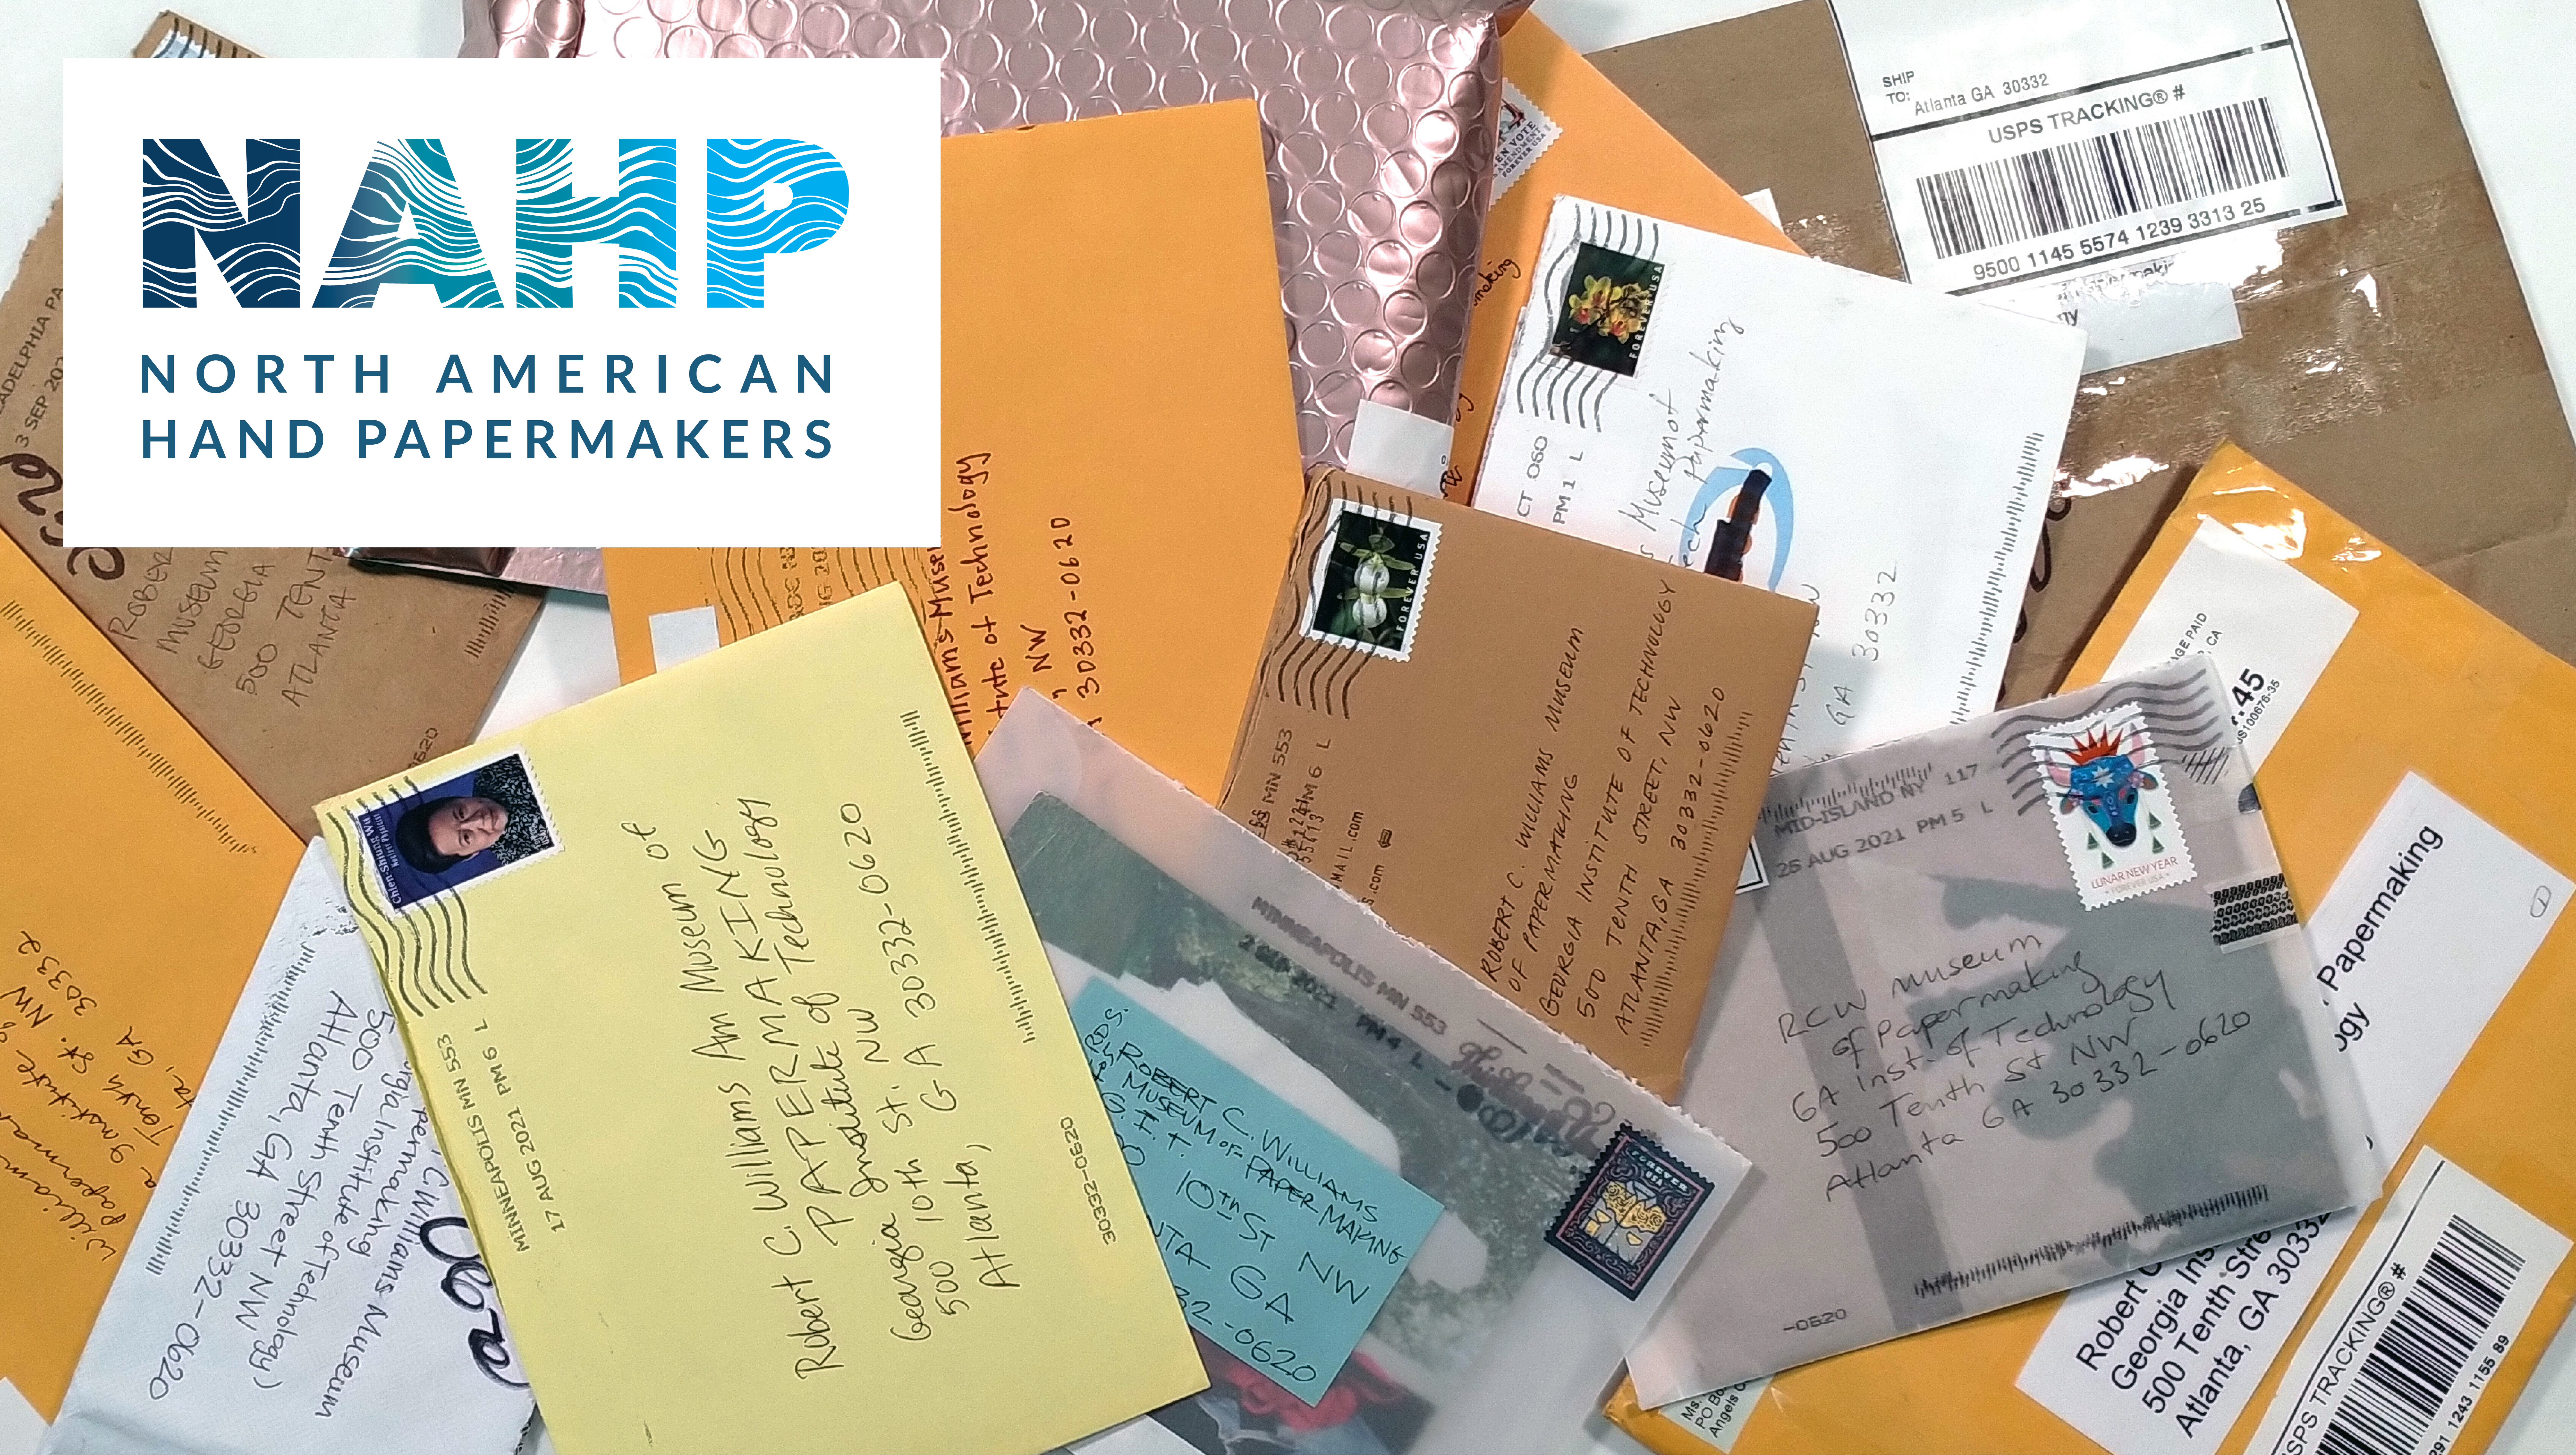 The North American Hand Papermakers logo features san serif capital block letters NAHP with a wave pattern embedded in the letters. The letters are various shades of turquois sitting on top of a photo of a pile of an assortment of mailed envelopes.